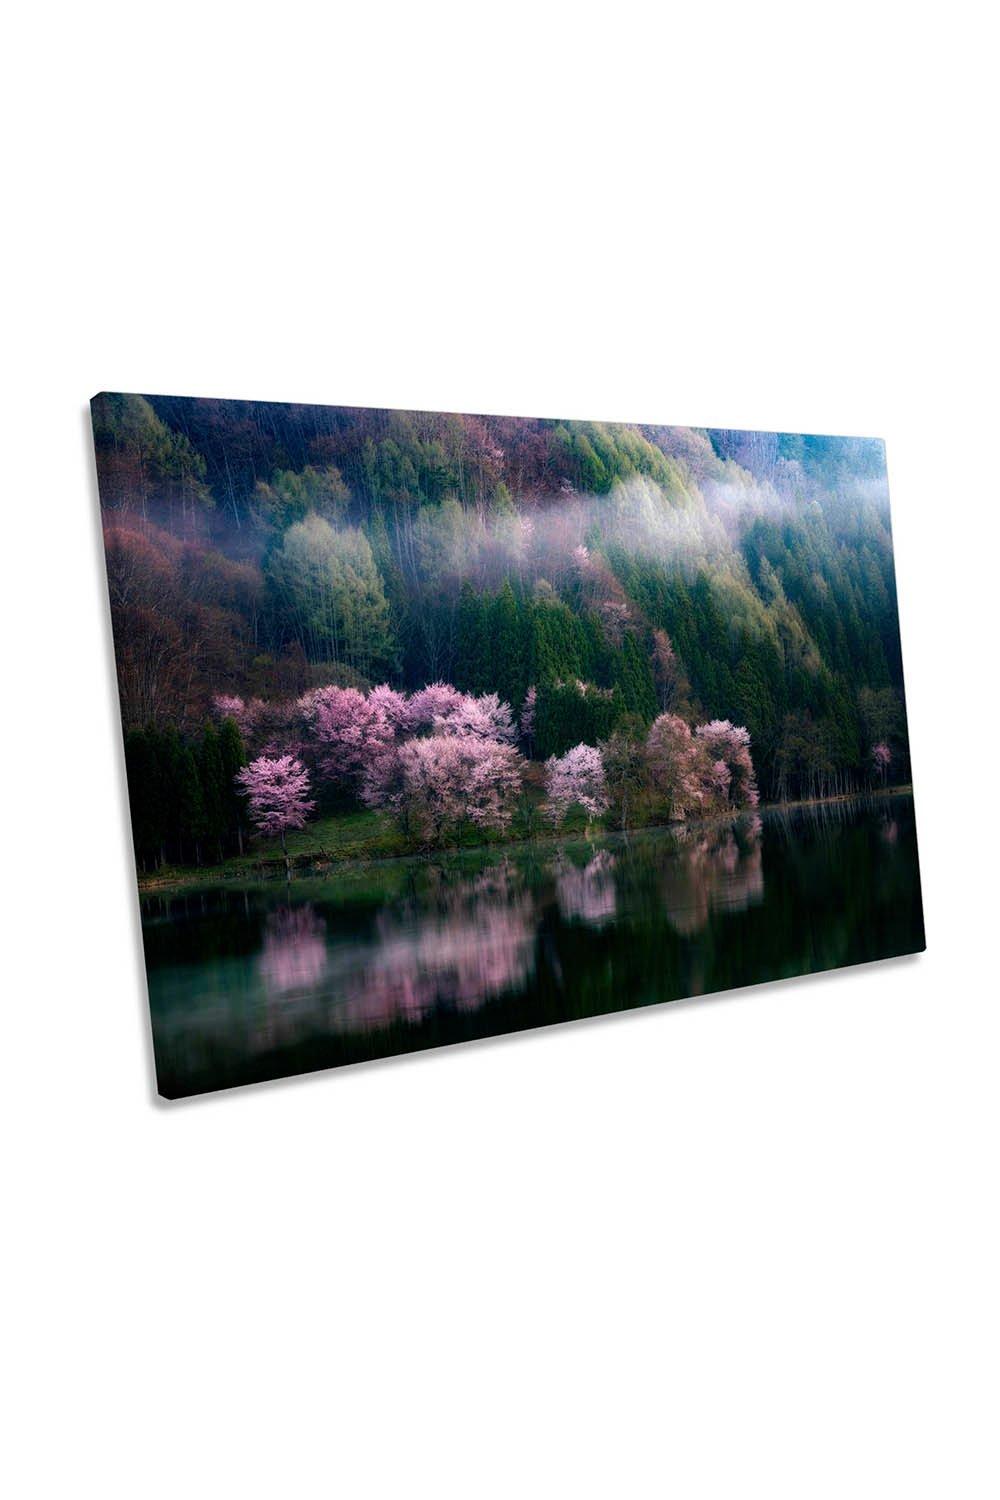 In the Morning Mist Lake Spring Blossom Canvas Wall Art Picture Print